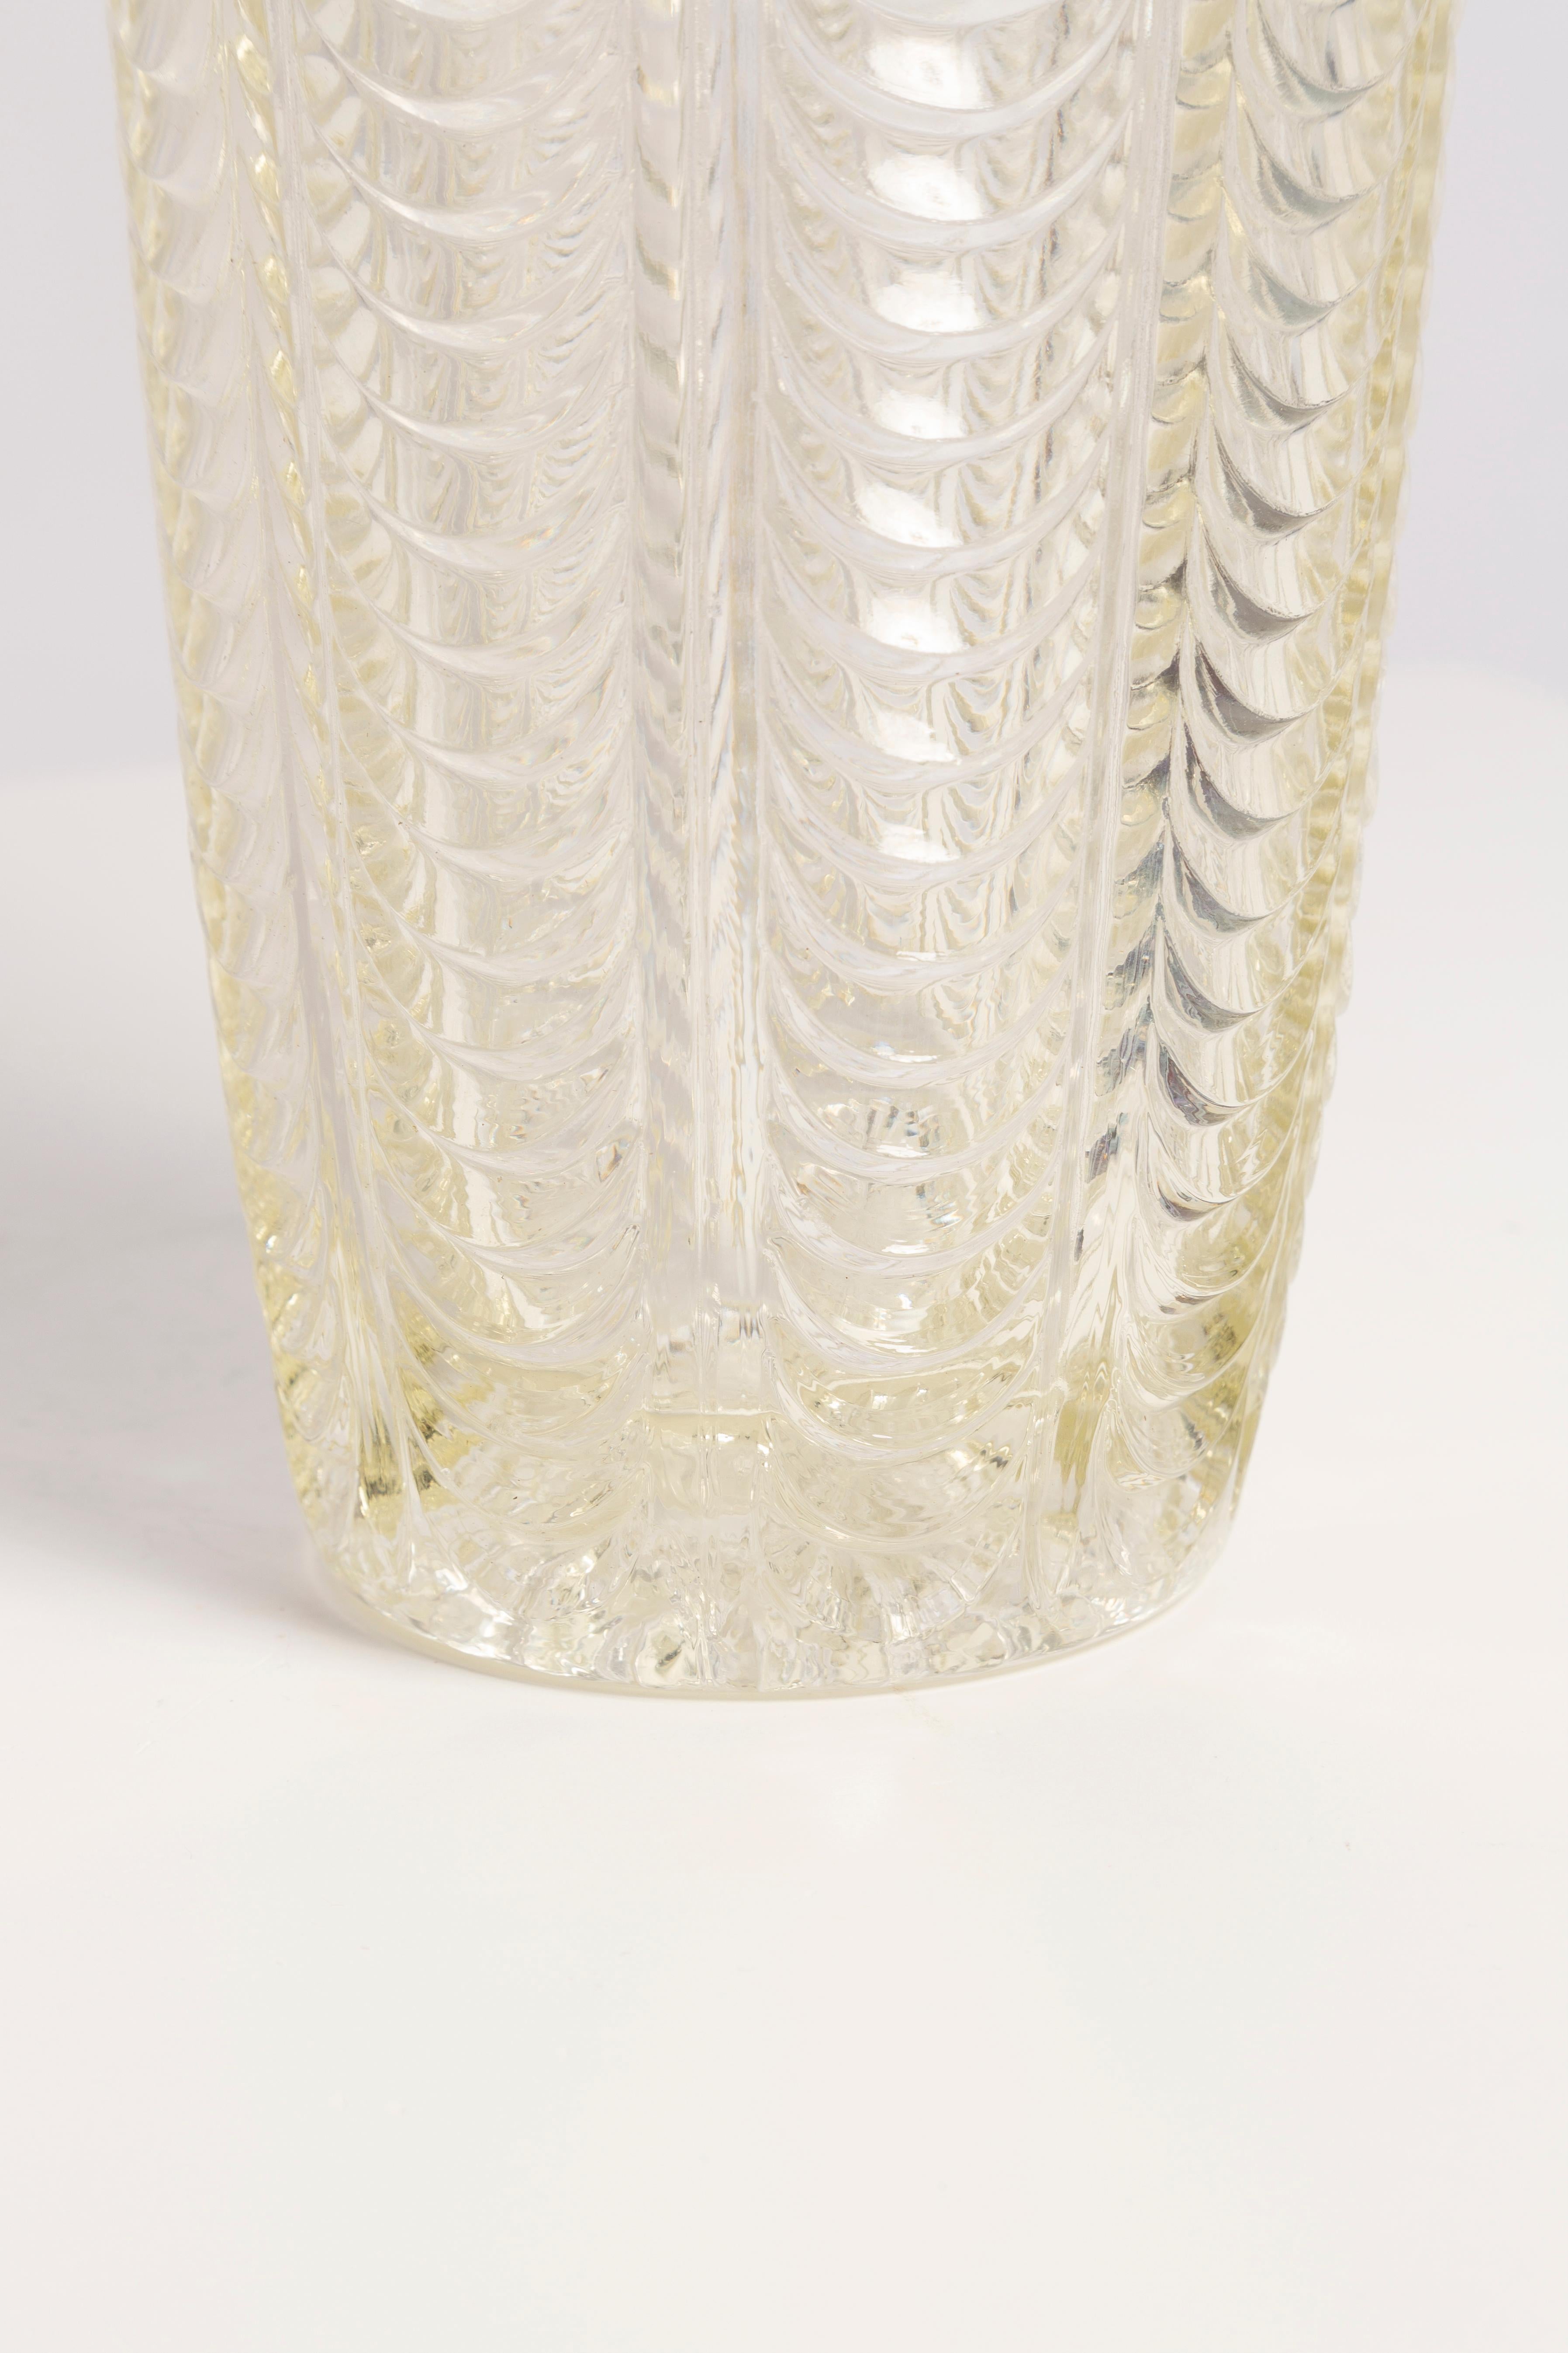 20th Century Mid-Century Crystal Transparent Vase, Italy, 1960s For Sale